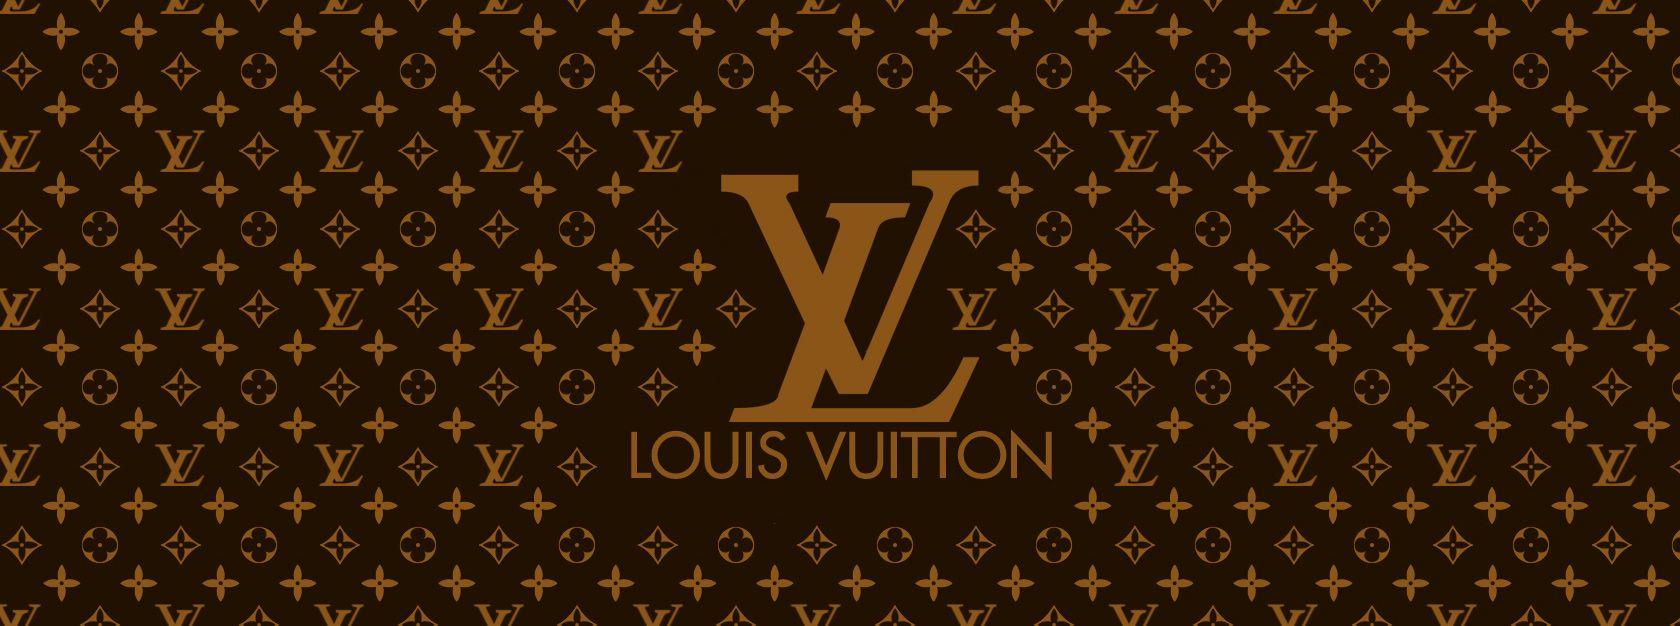 Louis Vuitton: Of Monogram, Trunks, and Damier | TheRichest